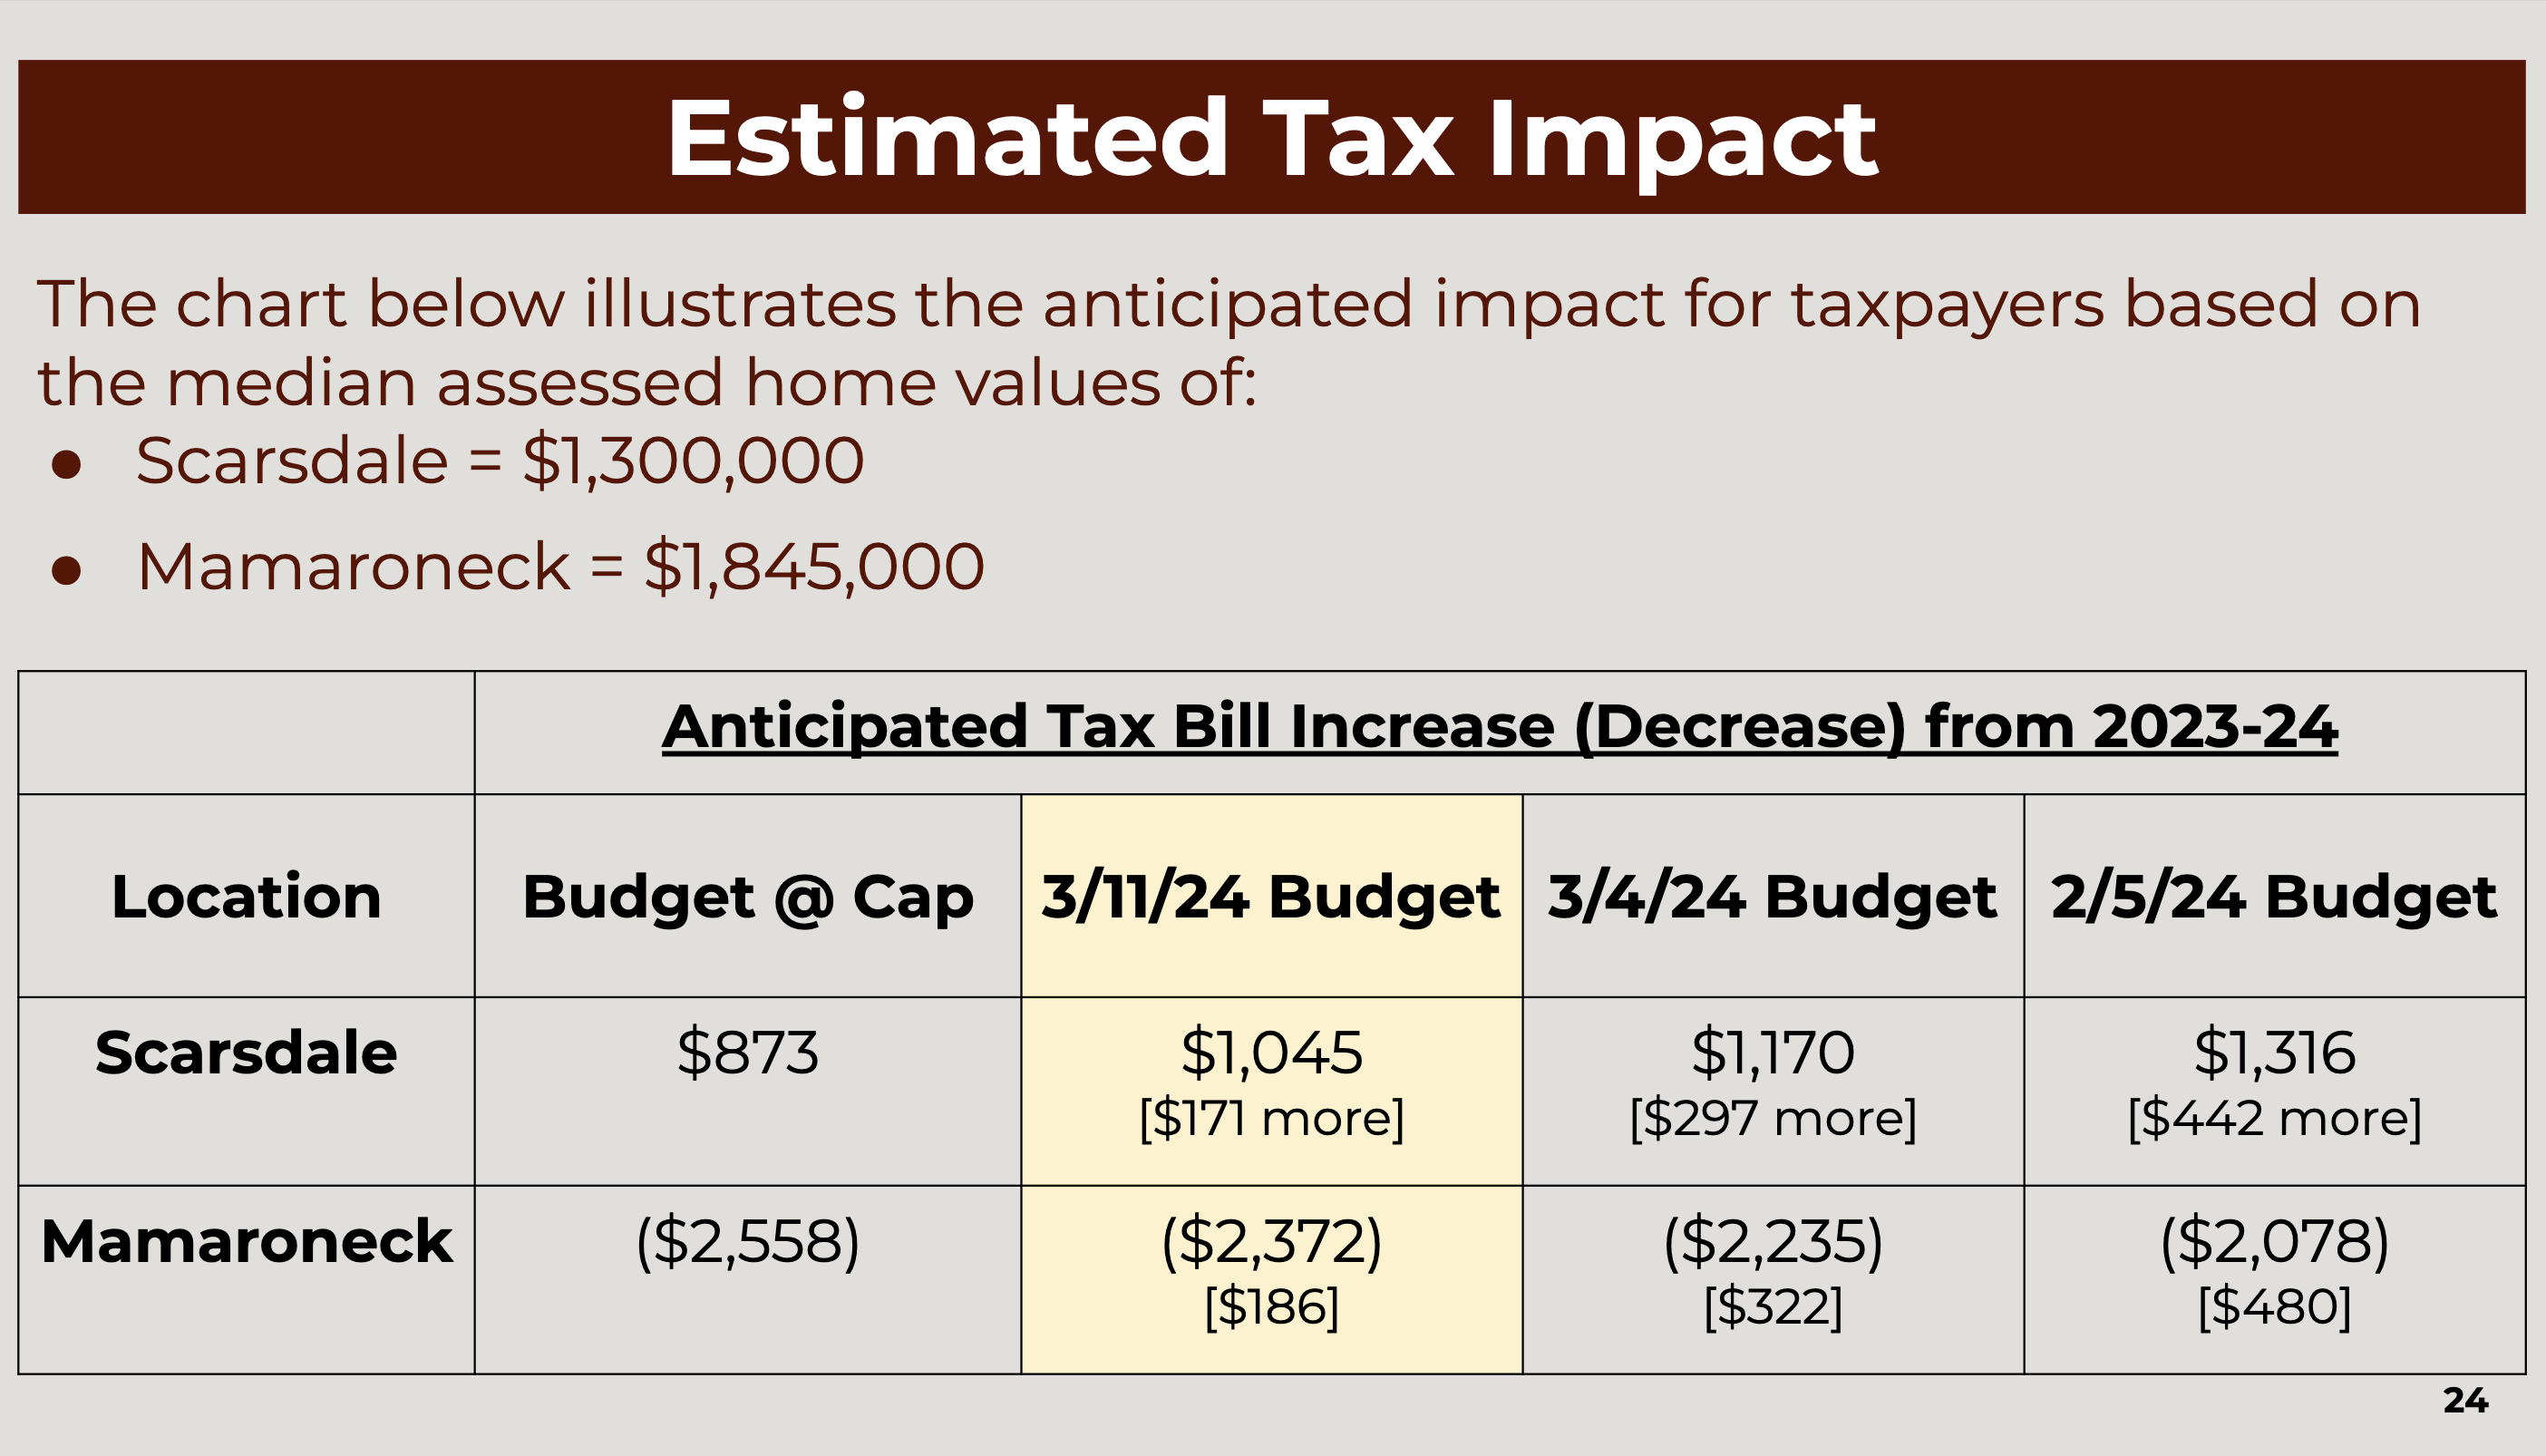 TAxImpact